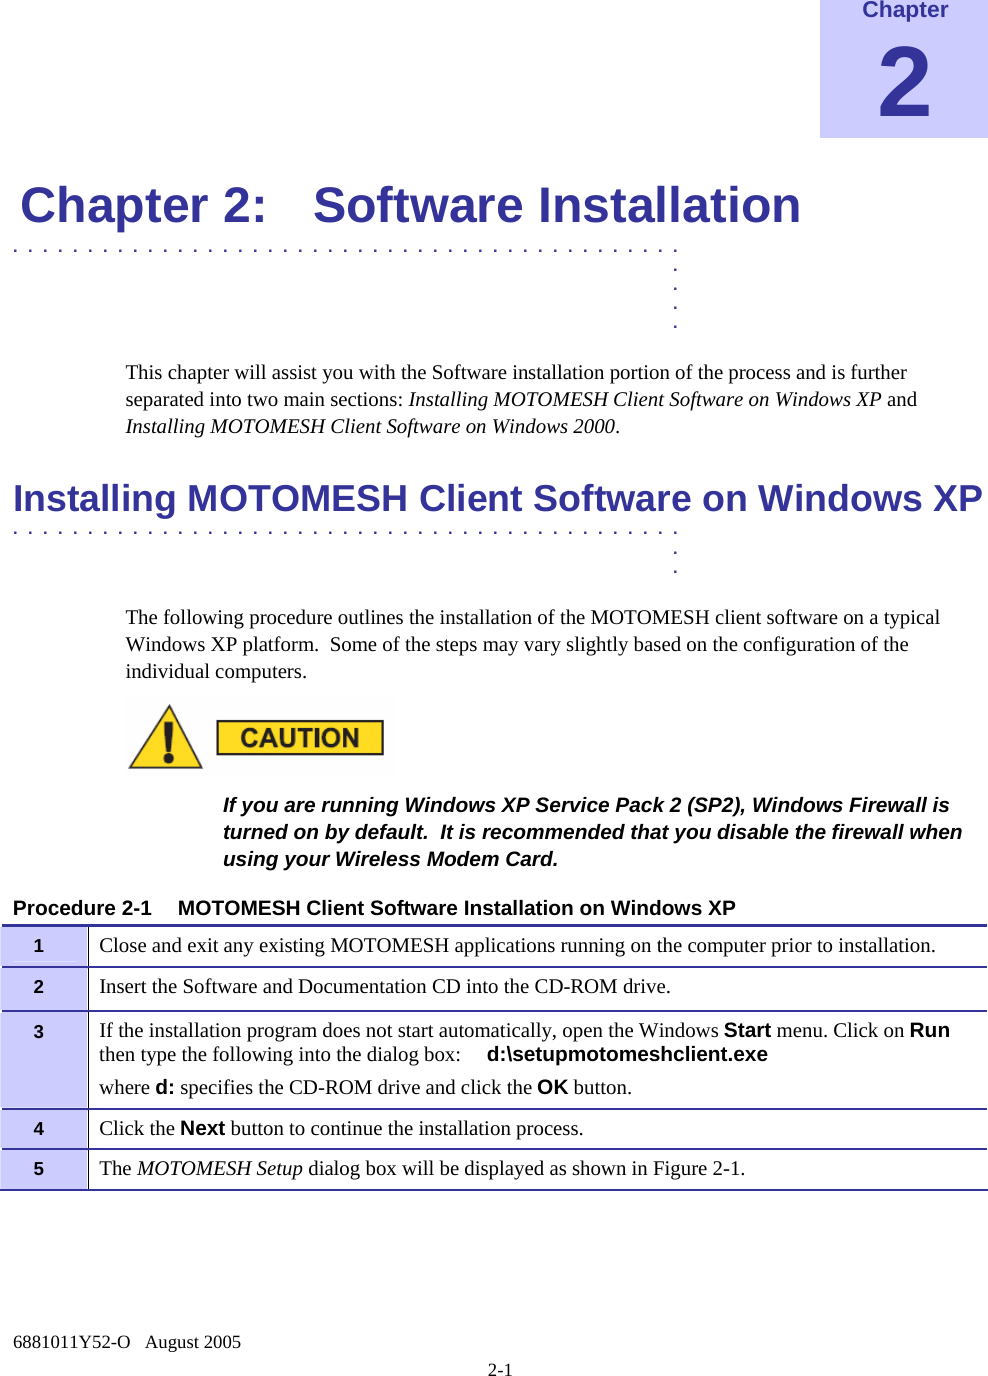  6881011Y52-O   August 2005 2-1 Chapter 2 Chapter 2:  Software Installation .............................................  .  .  .  . This chapter will assist you with the Software installation portion of the process and is further separated into two main sections: Installing MOTOMESH Client Software on Windows XP and Installing MOTOMESH Client Software on Windows 2000. Installing MOTOMESH Client Software on Windows XP  .............................................  .  . The following procedure outlines the installation of the MOTOMESH client software on a typical Windows XP platform.  Some of the steps may vary slightly based on the configuration of the individual computers.   If you are running Windows XP Service Pack 2 (SP2), Windows Firewall is turned on by default.  It is recommended that you disable the firewall when using your Wireless Modem Card.  Procedure 2-1  MOTOMESH Client Software Installation on Windows XP 1   Close and exit any existing MOTOMESH applications running on the computer prior to installation. 2   Insert the Software and Documentation CD into the CD-ROM drive. 3   If the installation program does not start automatically, open the Windows Start menu. Click on Run then type the following into the dialog box:     d:\setupmotomeshclient.exe where d: specifies the CD-ROM drive and click the OK button. 4   Click the Next button to continue the installation process. 5   The MOTOMESH Setup dialog box will be displayed as shown in Figure 2-1. 